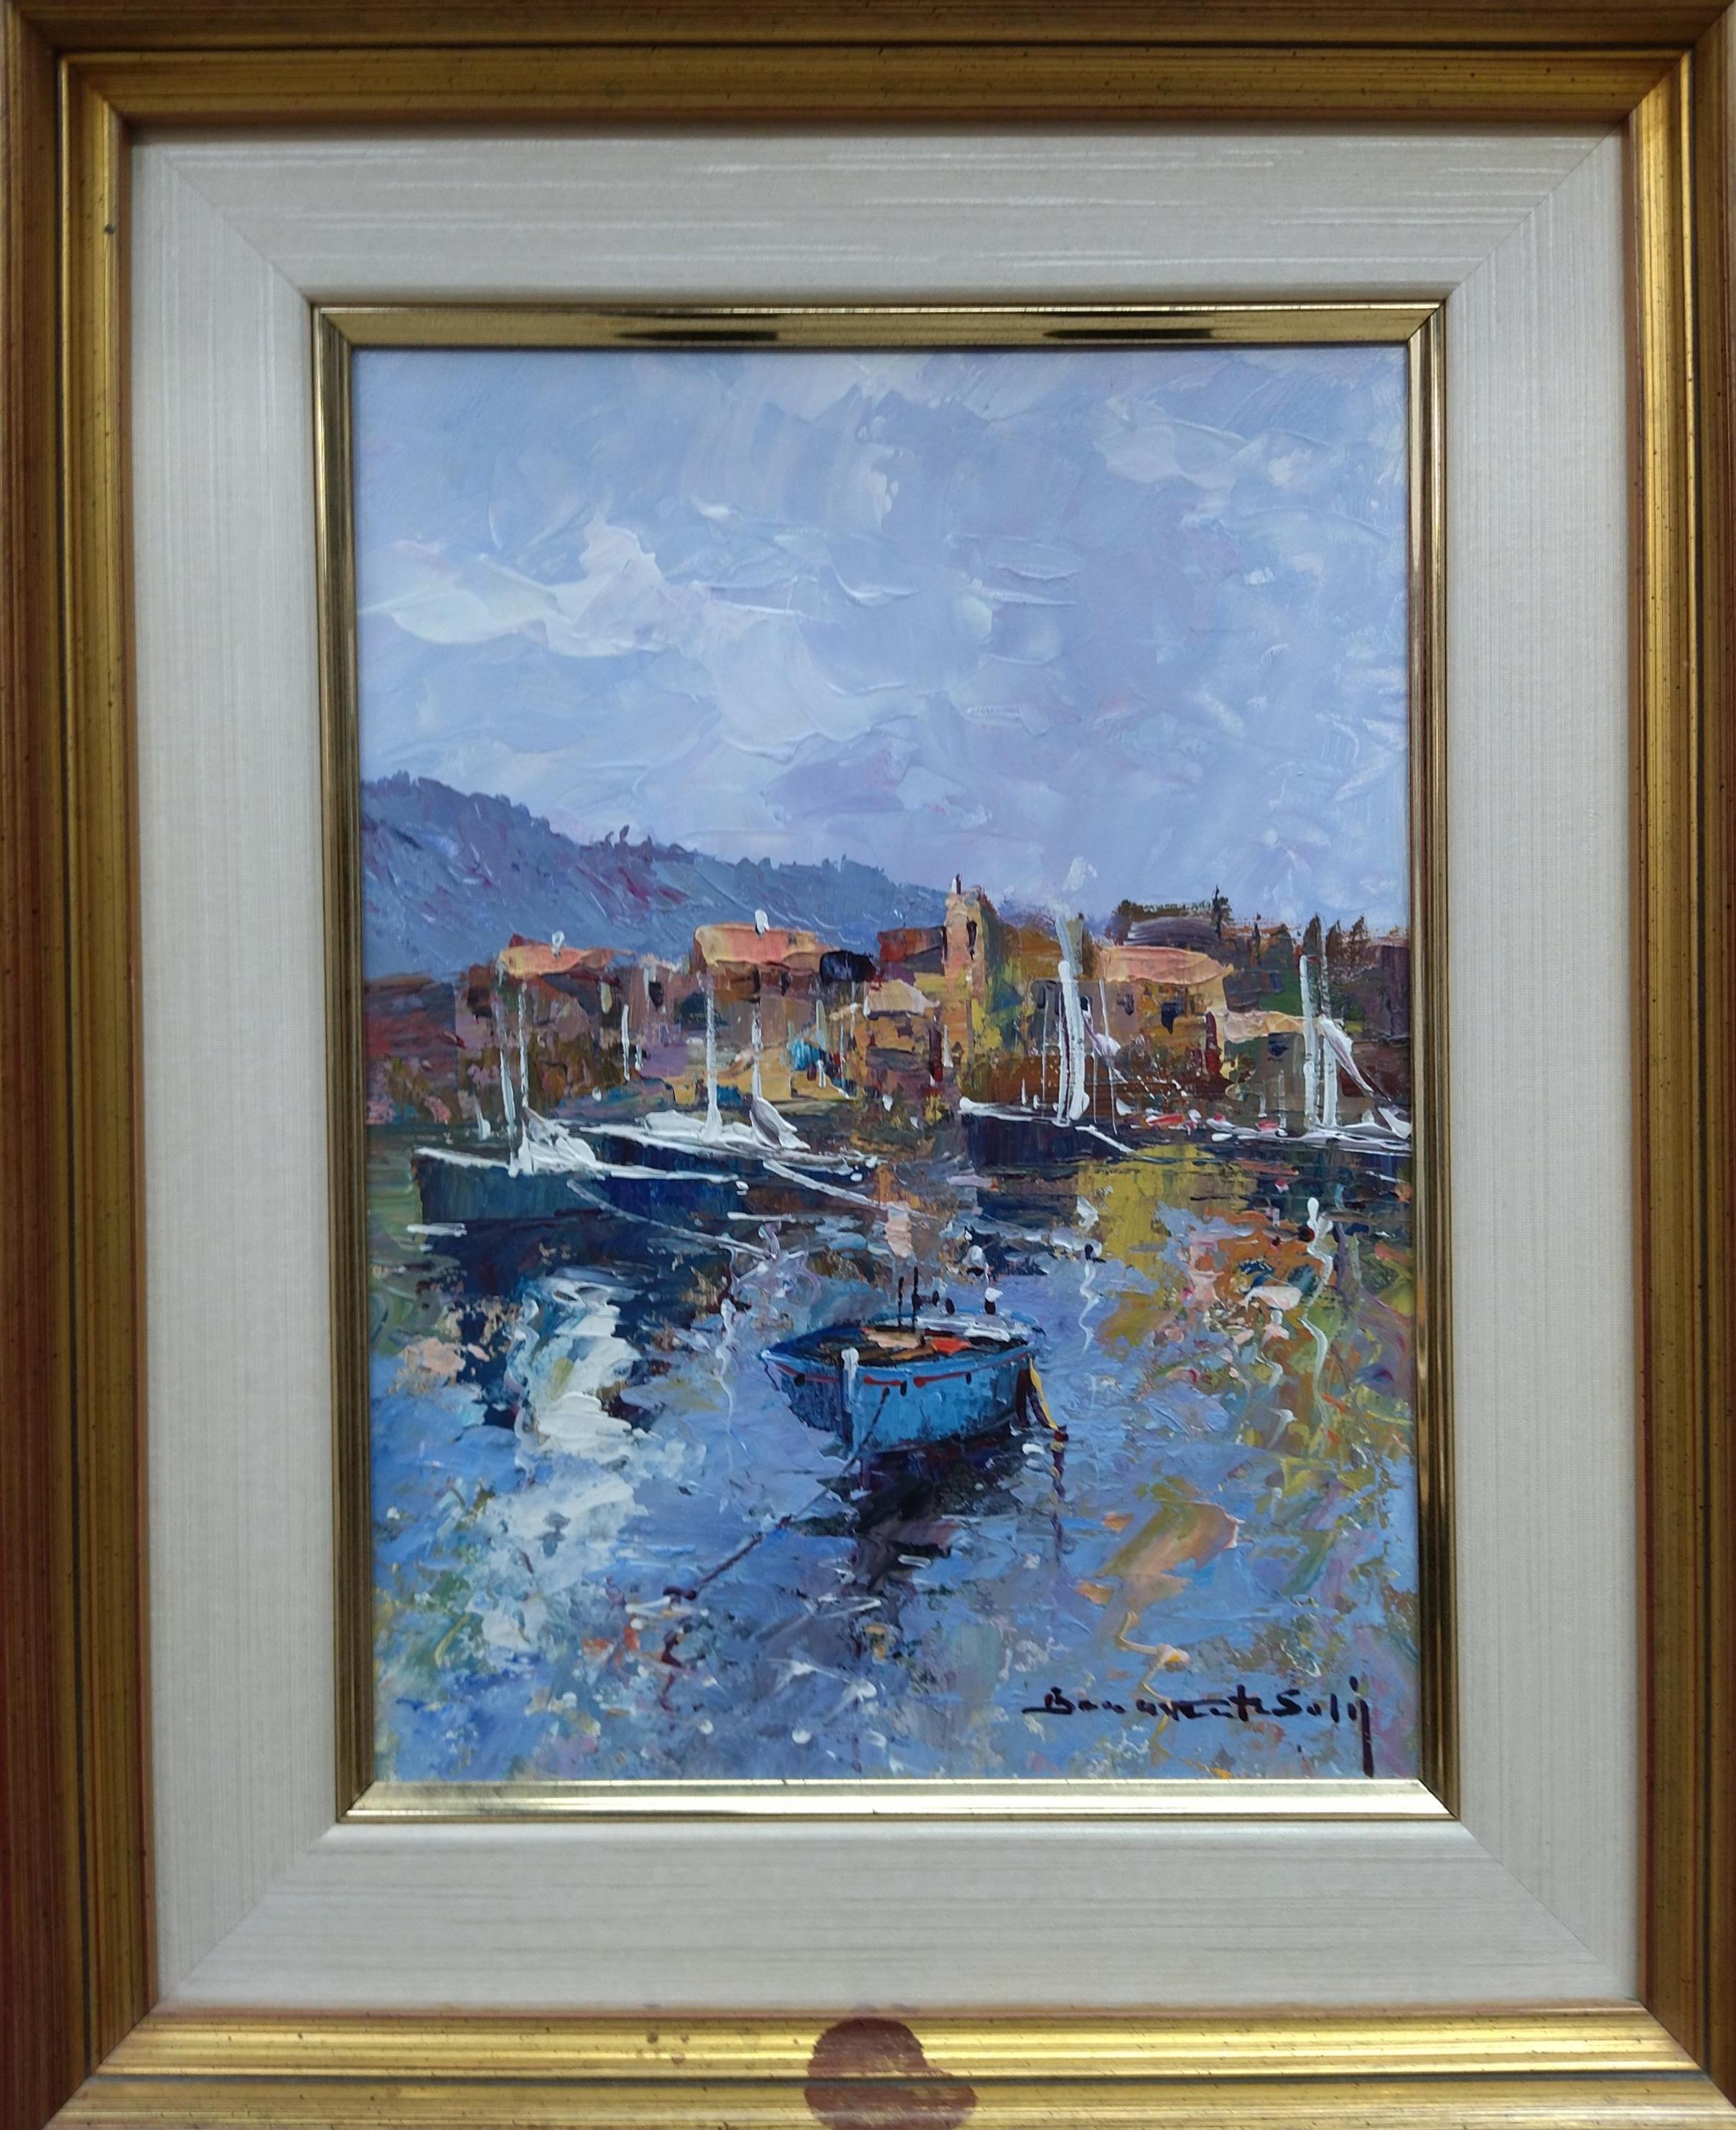   original expressionist acrylic painting. Framed
During its first exhibition in Paris, the French press catalogs it like "The Catalan Sorolla".
Honorary Member of the MECOART (Mediterranean Container Art Center of San Francisco, California)